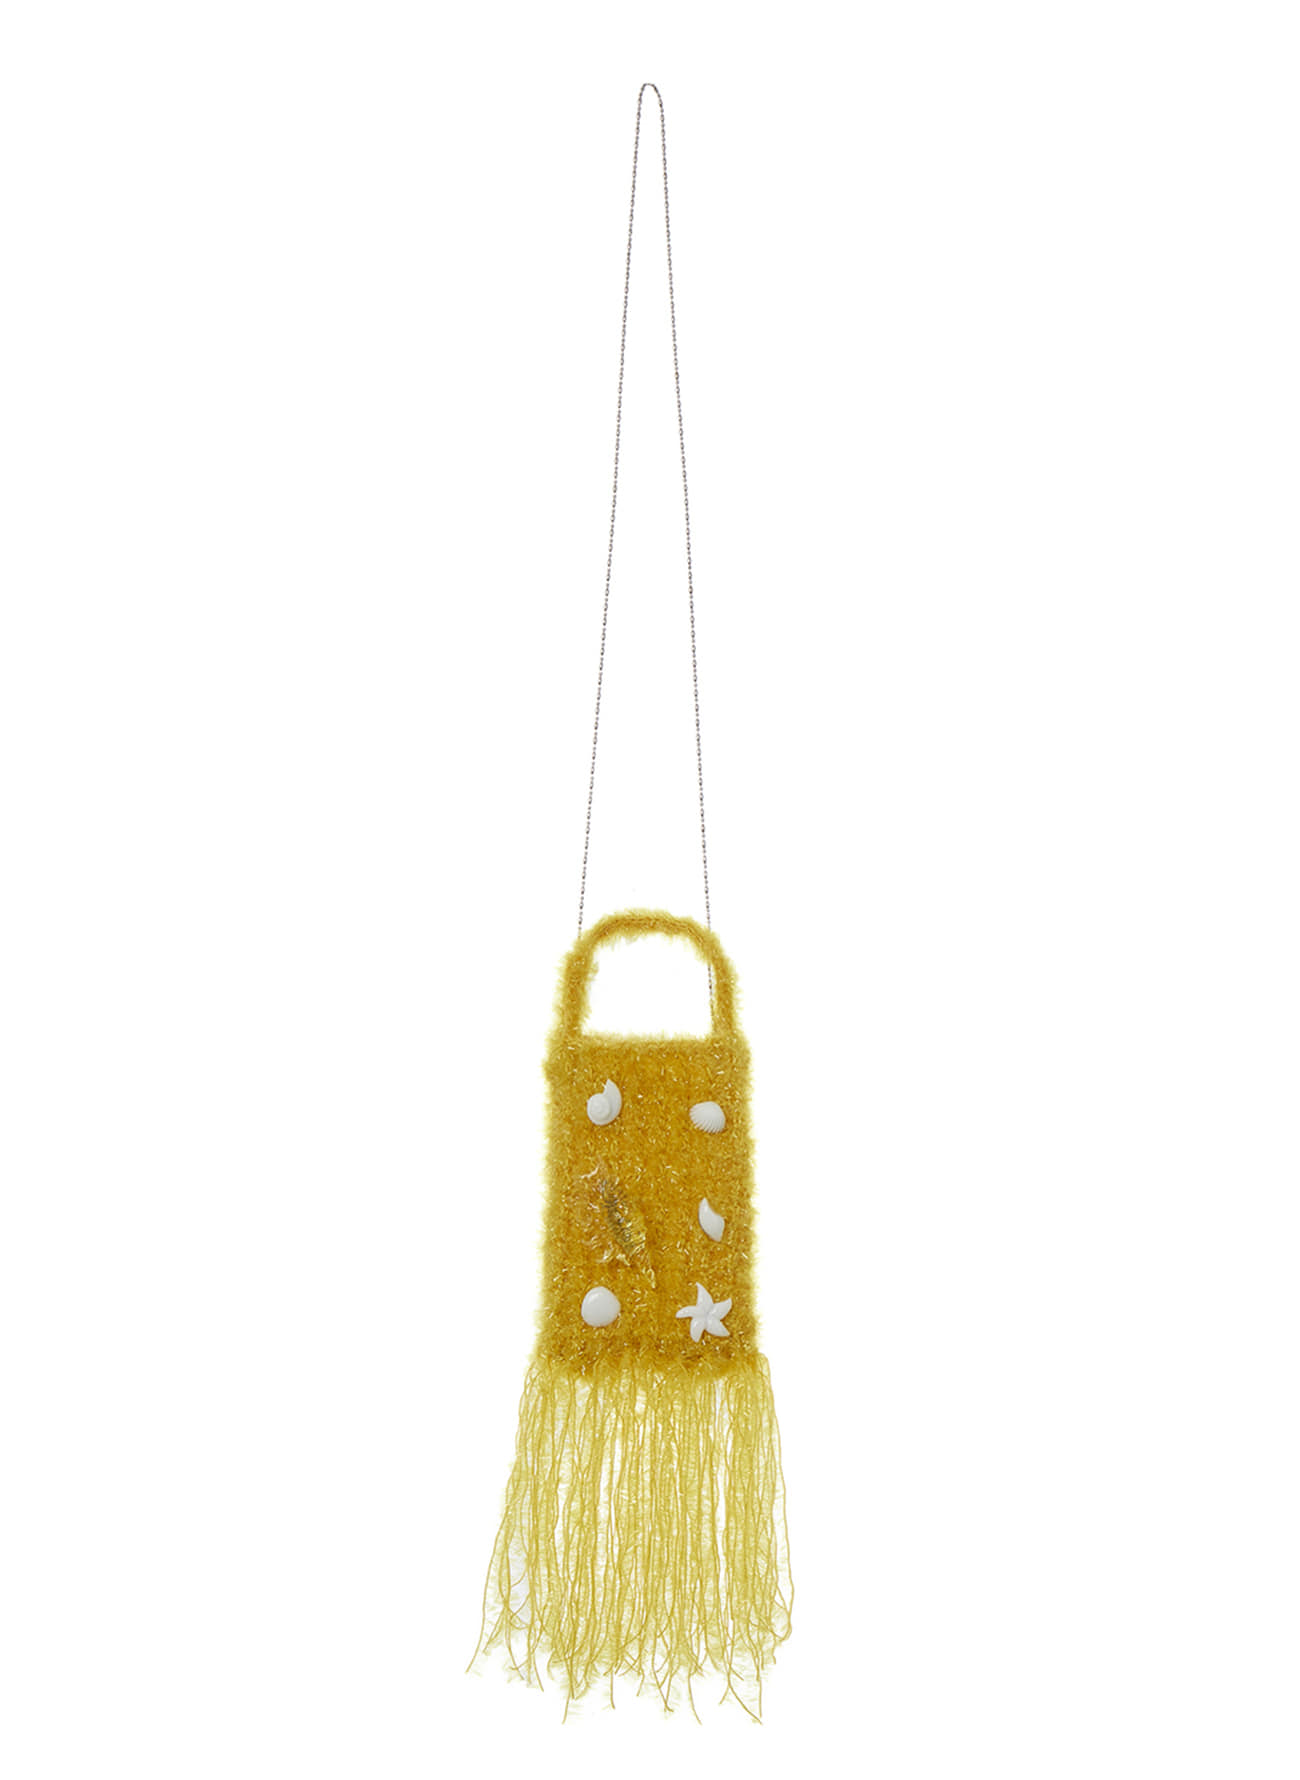 SEA COLLECTION KNITTED BAG, YELLOW